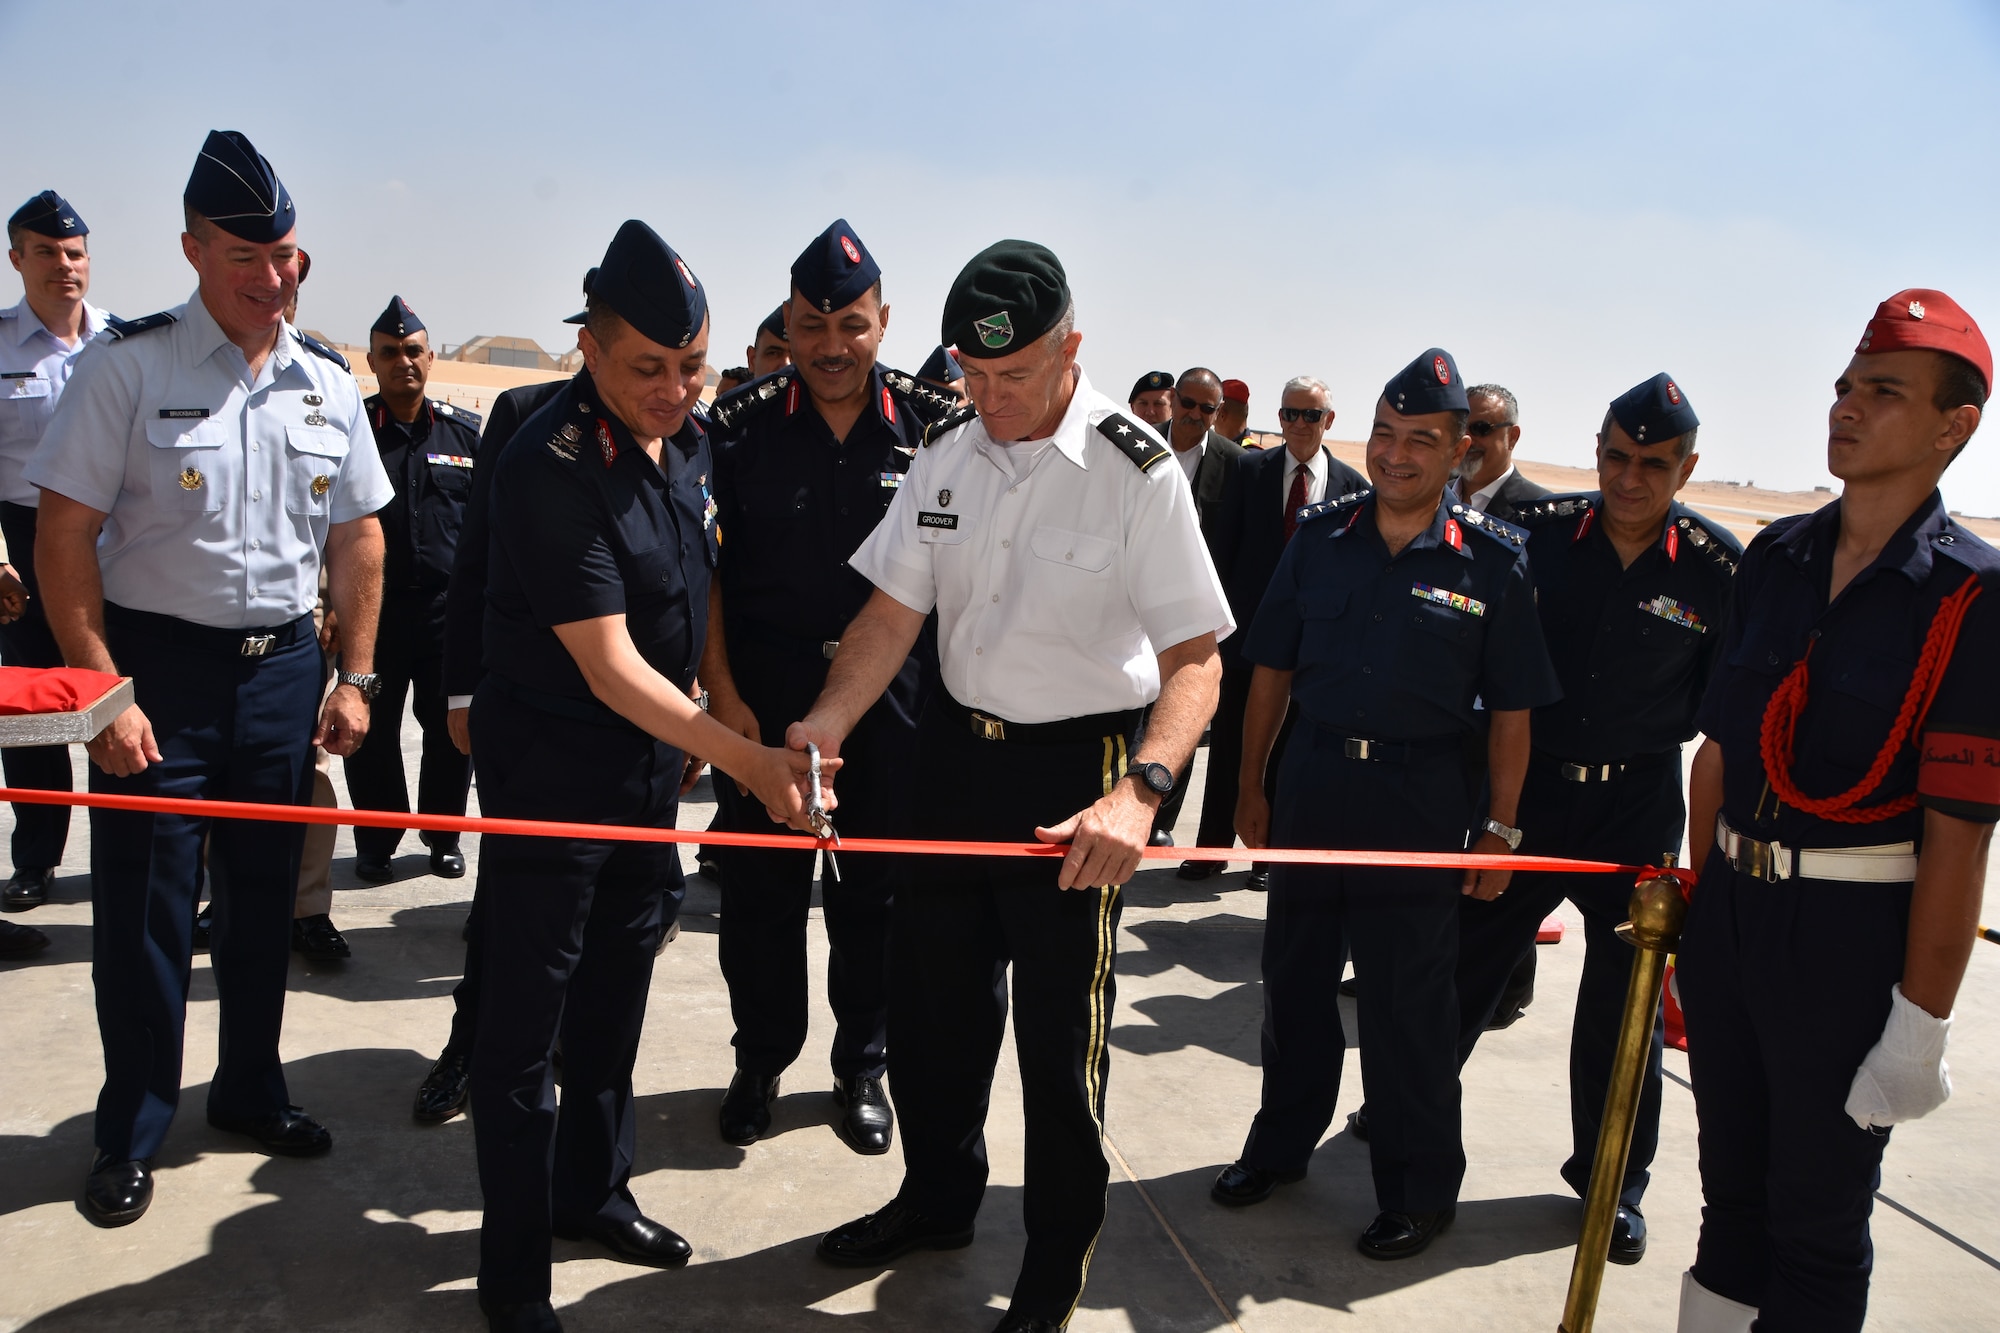 A ribbon cutting ceremony at Cairo West Air Base, marking the completion of a $184 million construction project and delivery of 20 F-16s. U.S. Air Force Brig. Gen Brian Bruckbauer (left), director of the Air Force Security Assistance and Cooperation Directorate, and U.S. Army Maj. Gen. Ralph Groover III (middle right) the Senior Defense Official, United States Embassy, Cairo Egypt, attended the event.